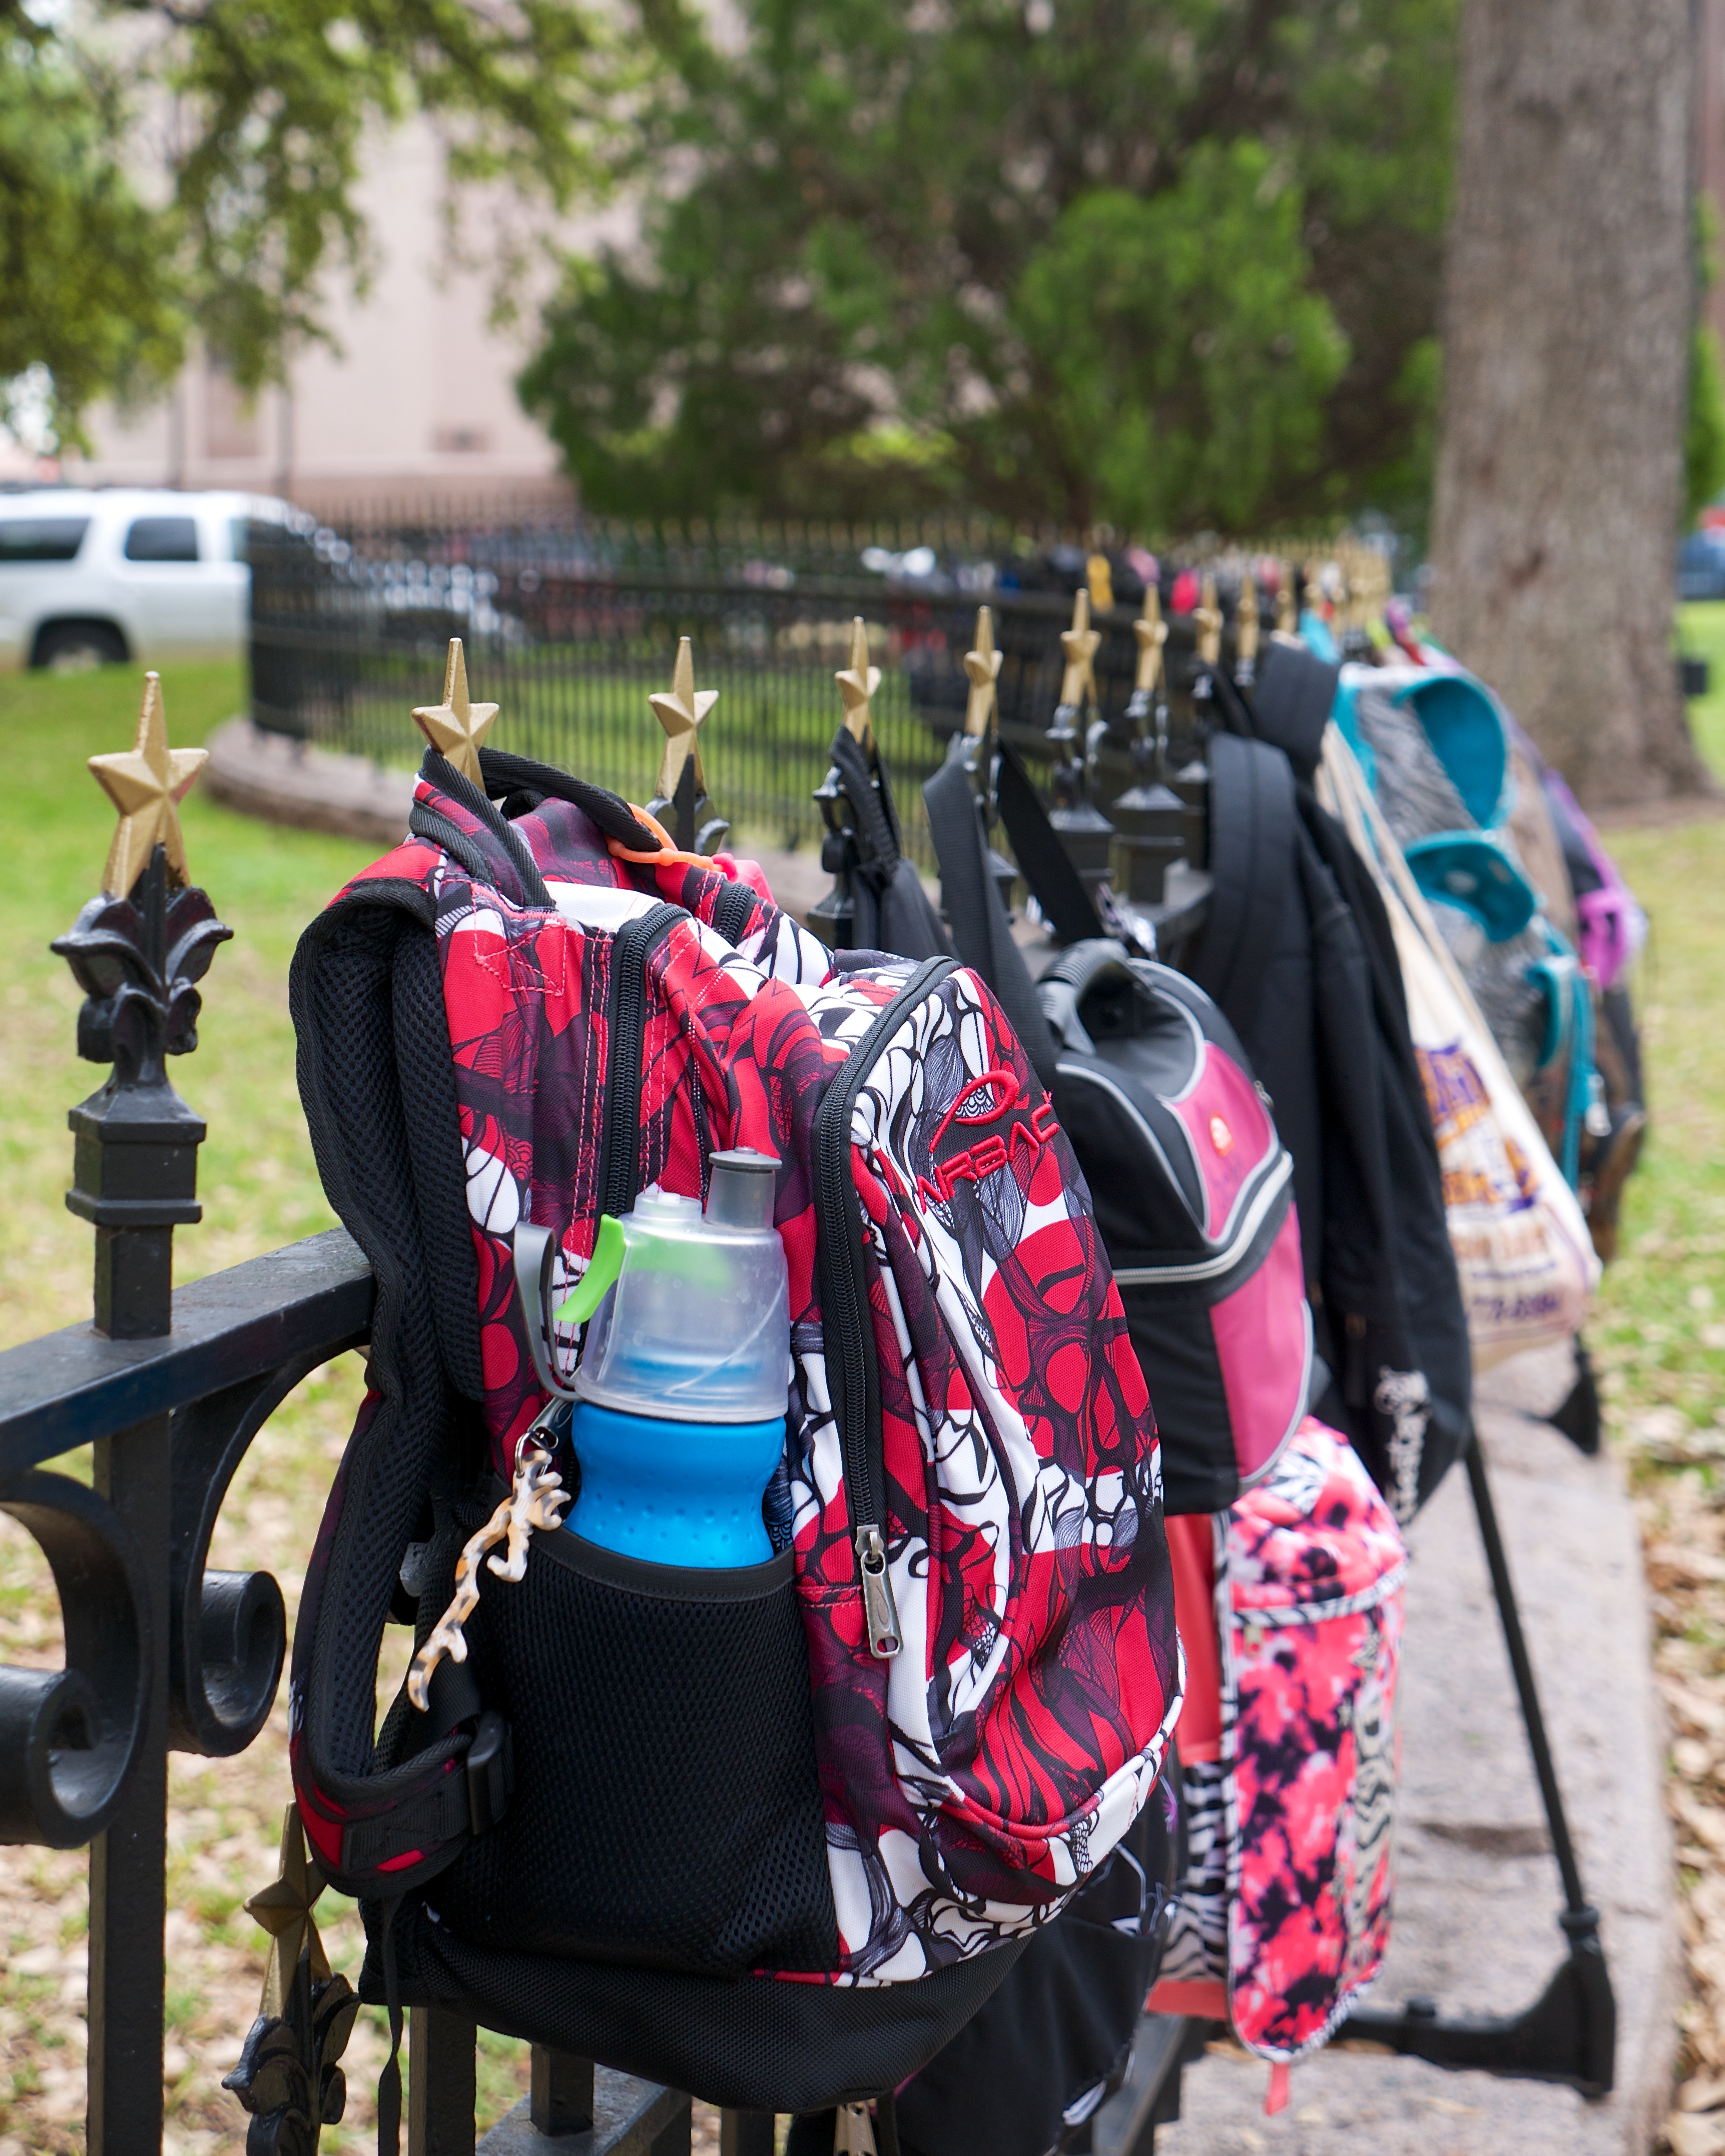 A range of schoolchildren's backpacks are hung on a wrought-iron fence